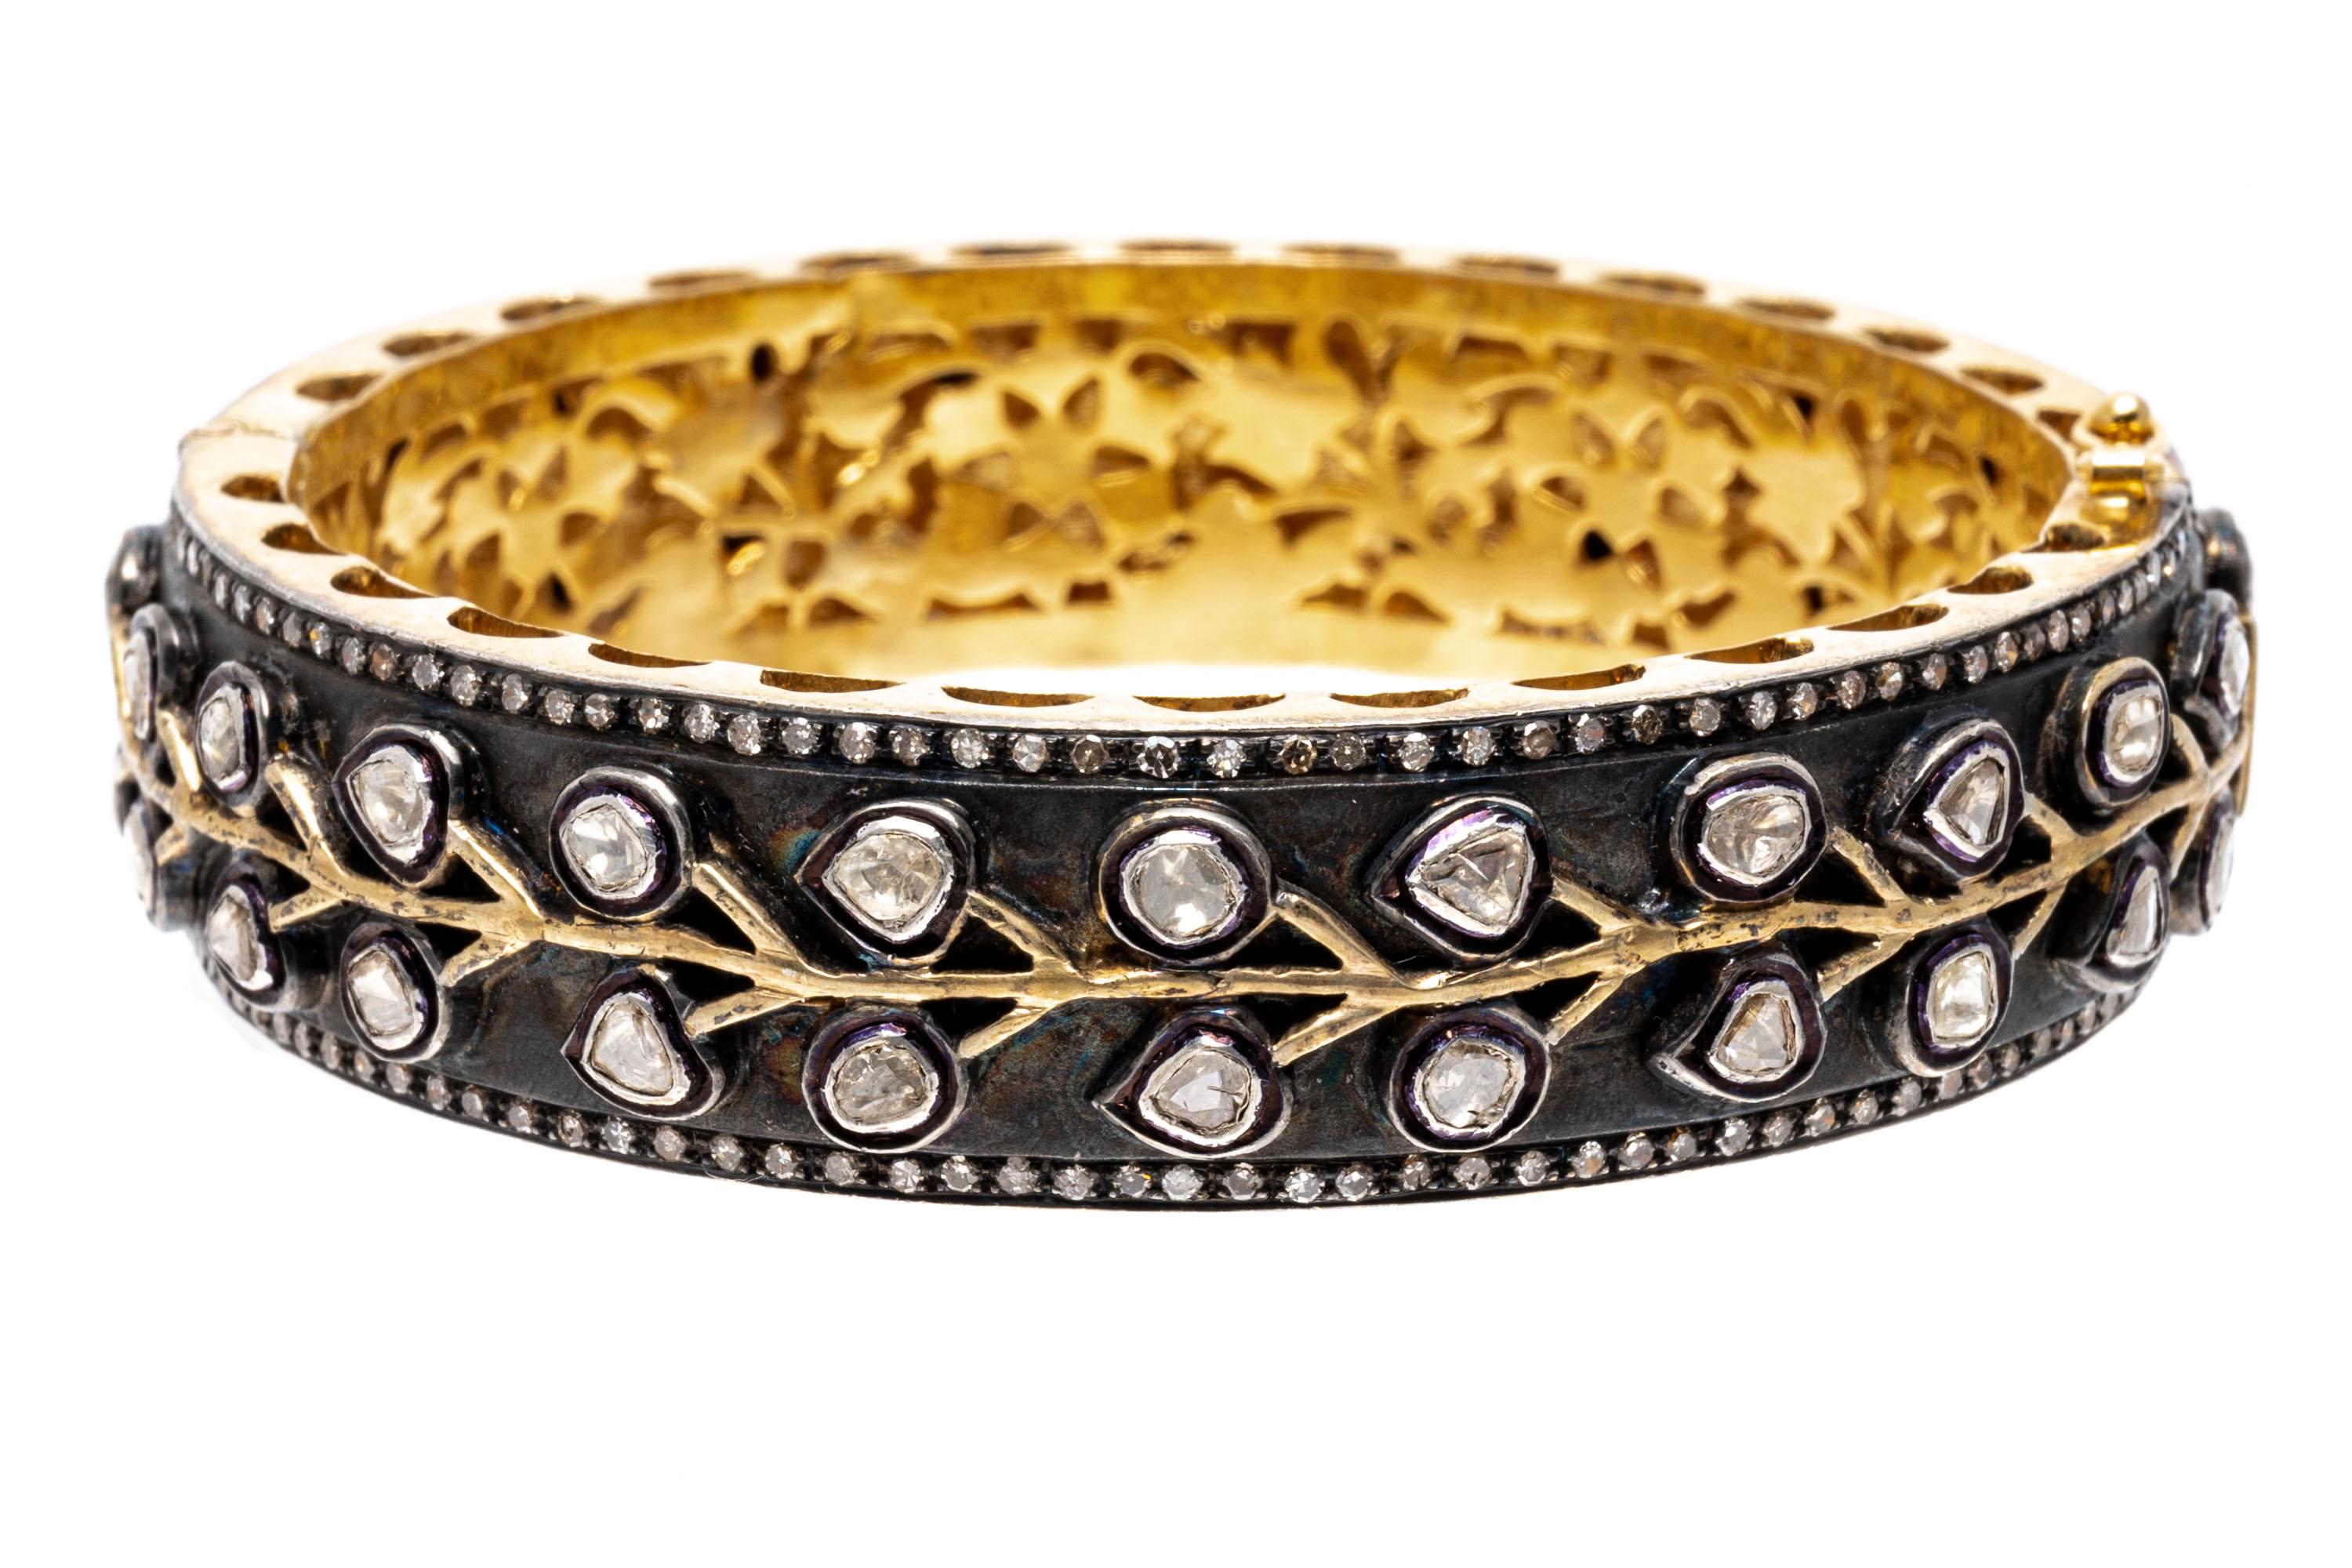 Sterling silver vermeil bracelet. This spectacular bracelet is a wide, hinged bangle bracelet, decorated with a white top and vermeil sides and interior, and set with a center vine pattern, adorned with bezel set, macle cut diamonds of varying